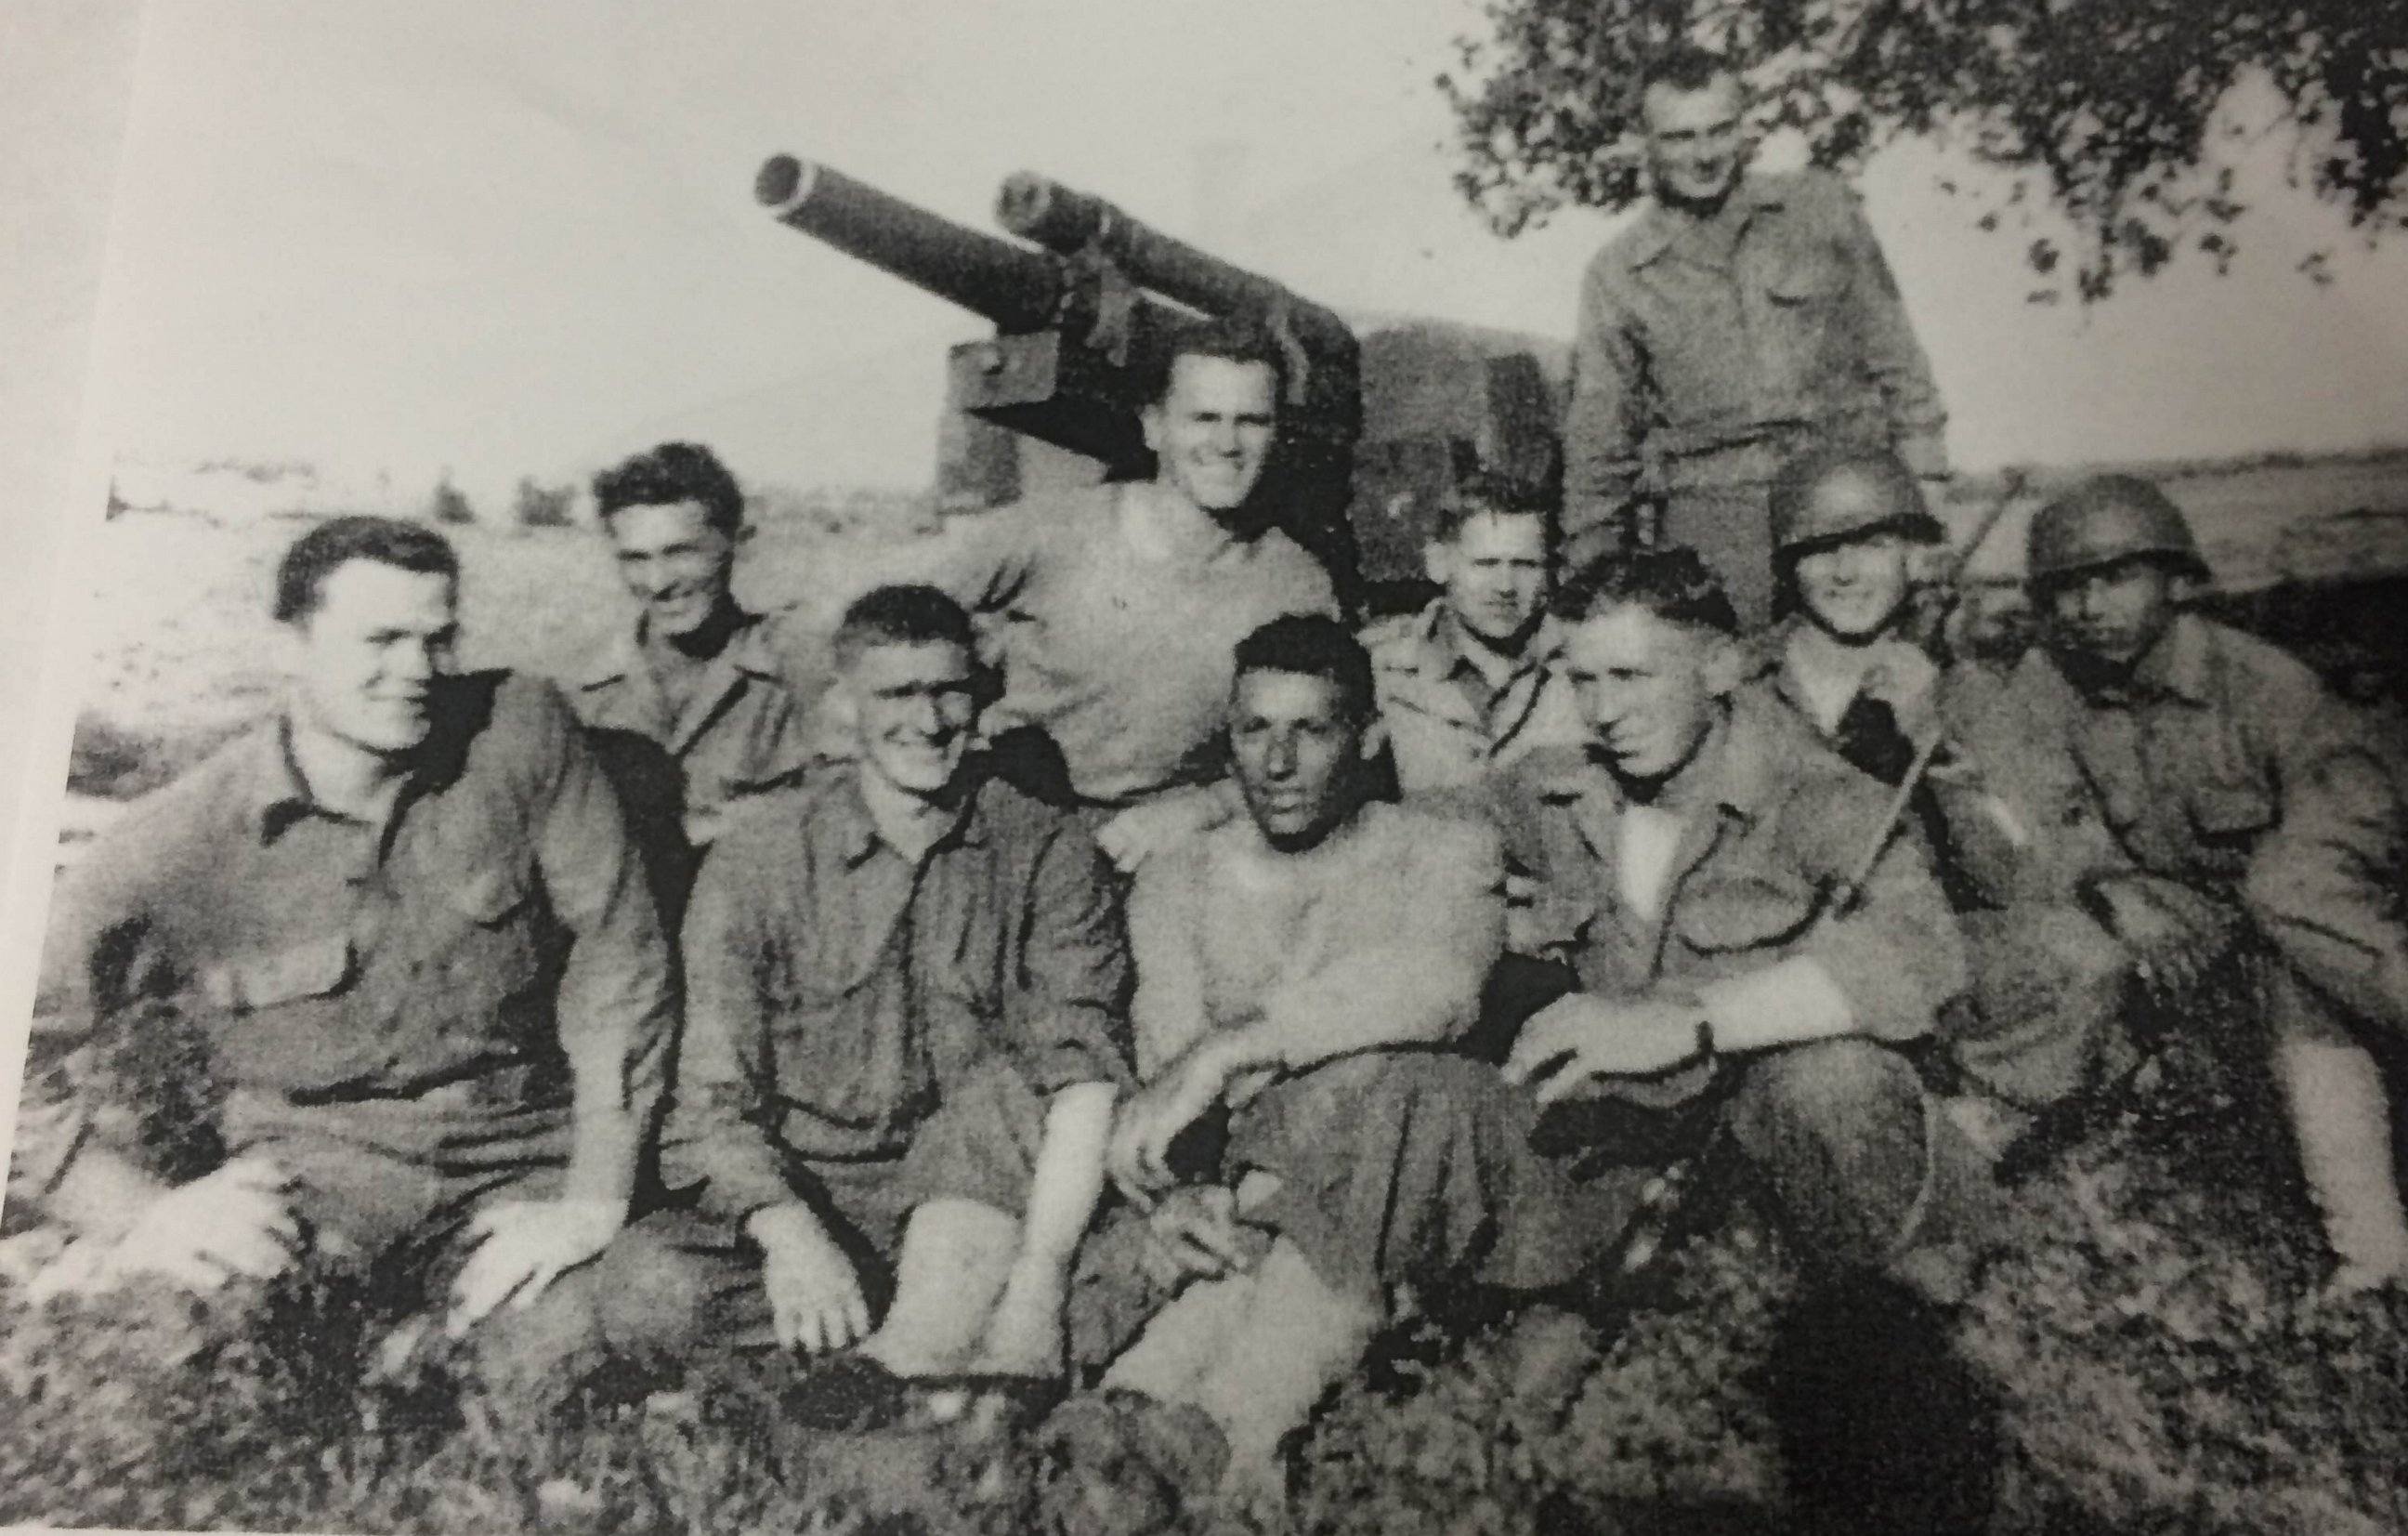 PHOTO: U.S. Army veteran Eligio Ramos is pictured here with his platoon during World War II.